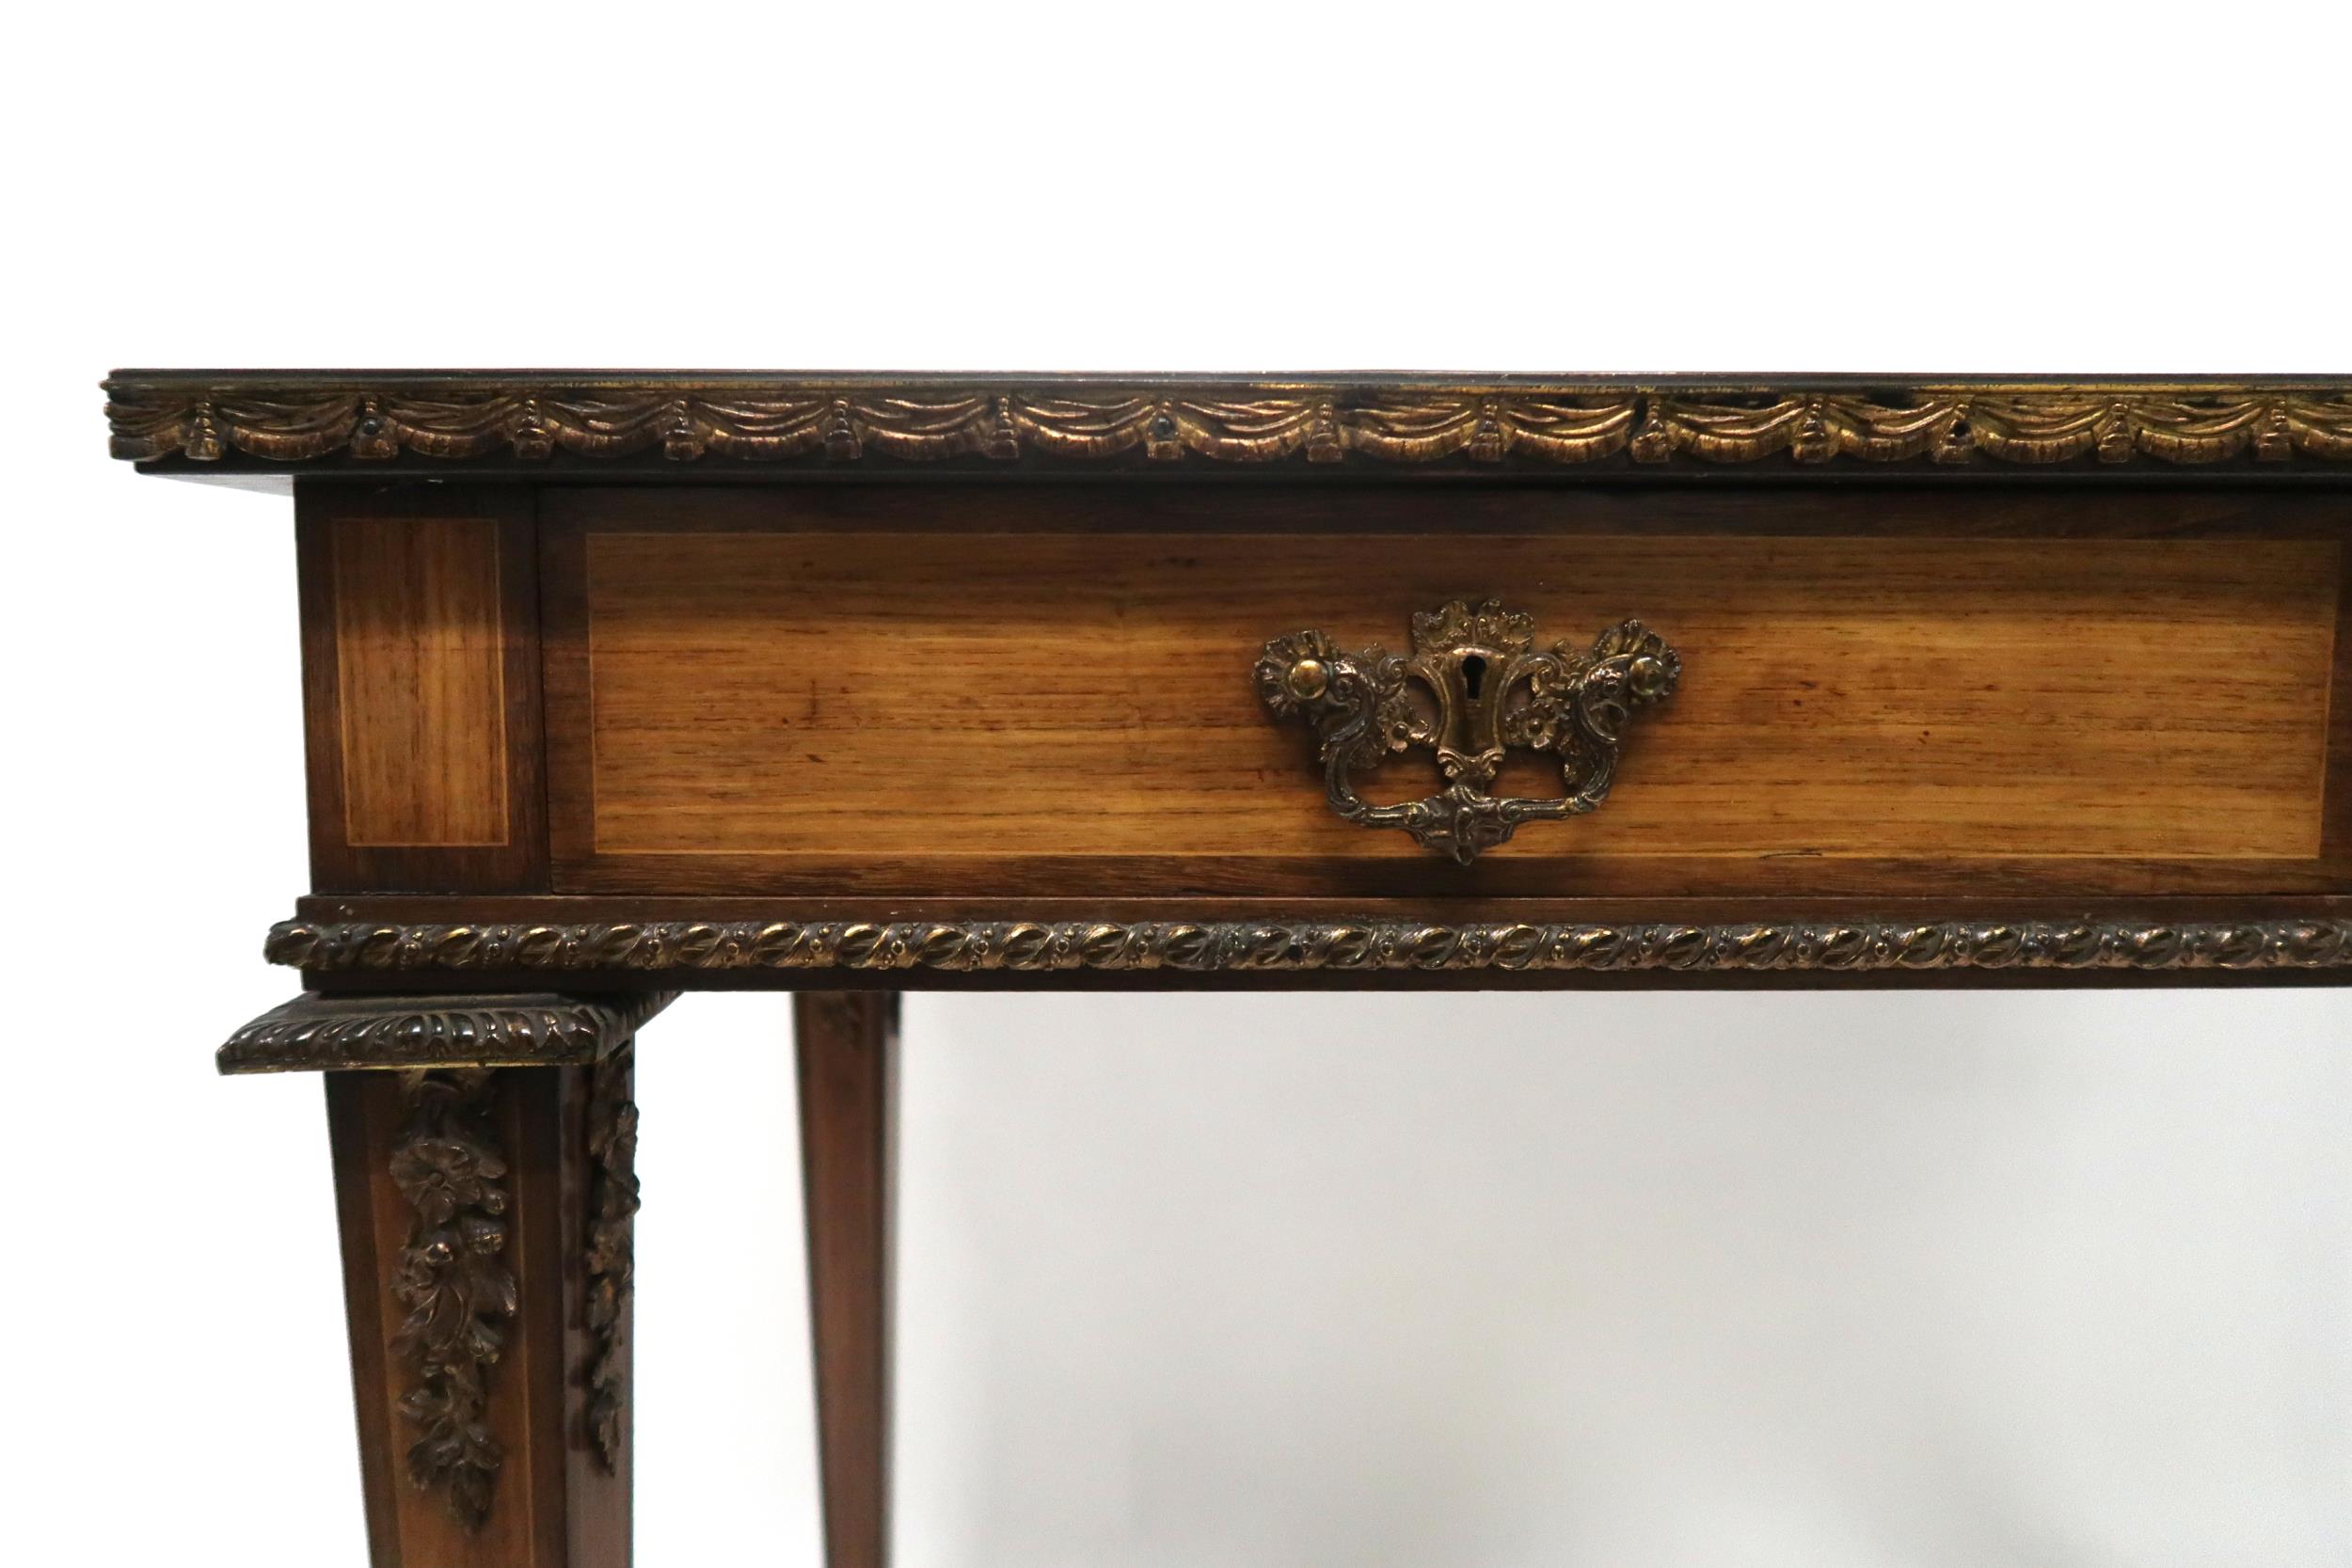 A CONTINENTAL LOUIS XVI STYLE KINGSWOOD BUREAU PLAT with parquetry inlaid top with gilt metal edge - Image 2 of 9